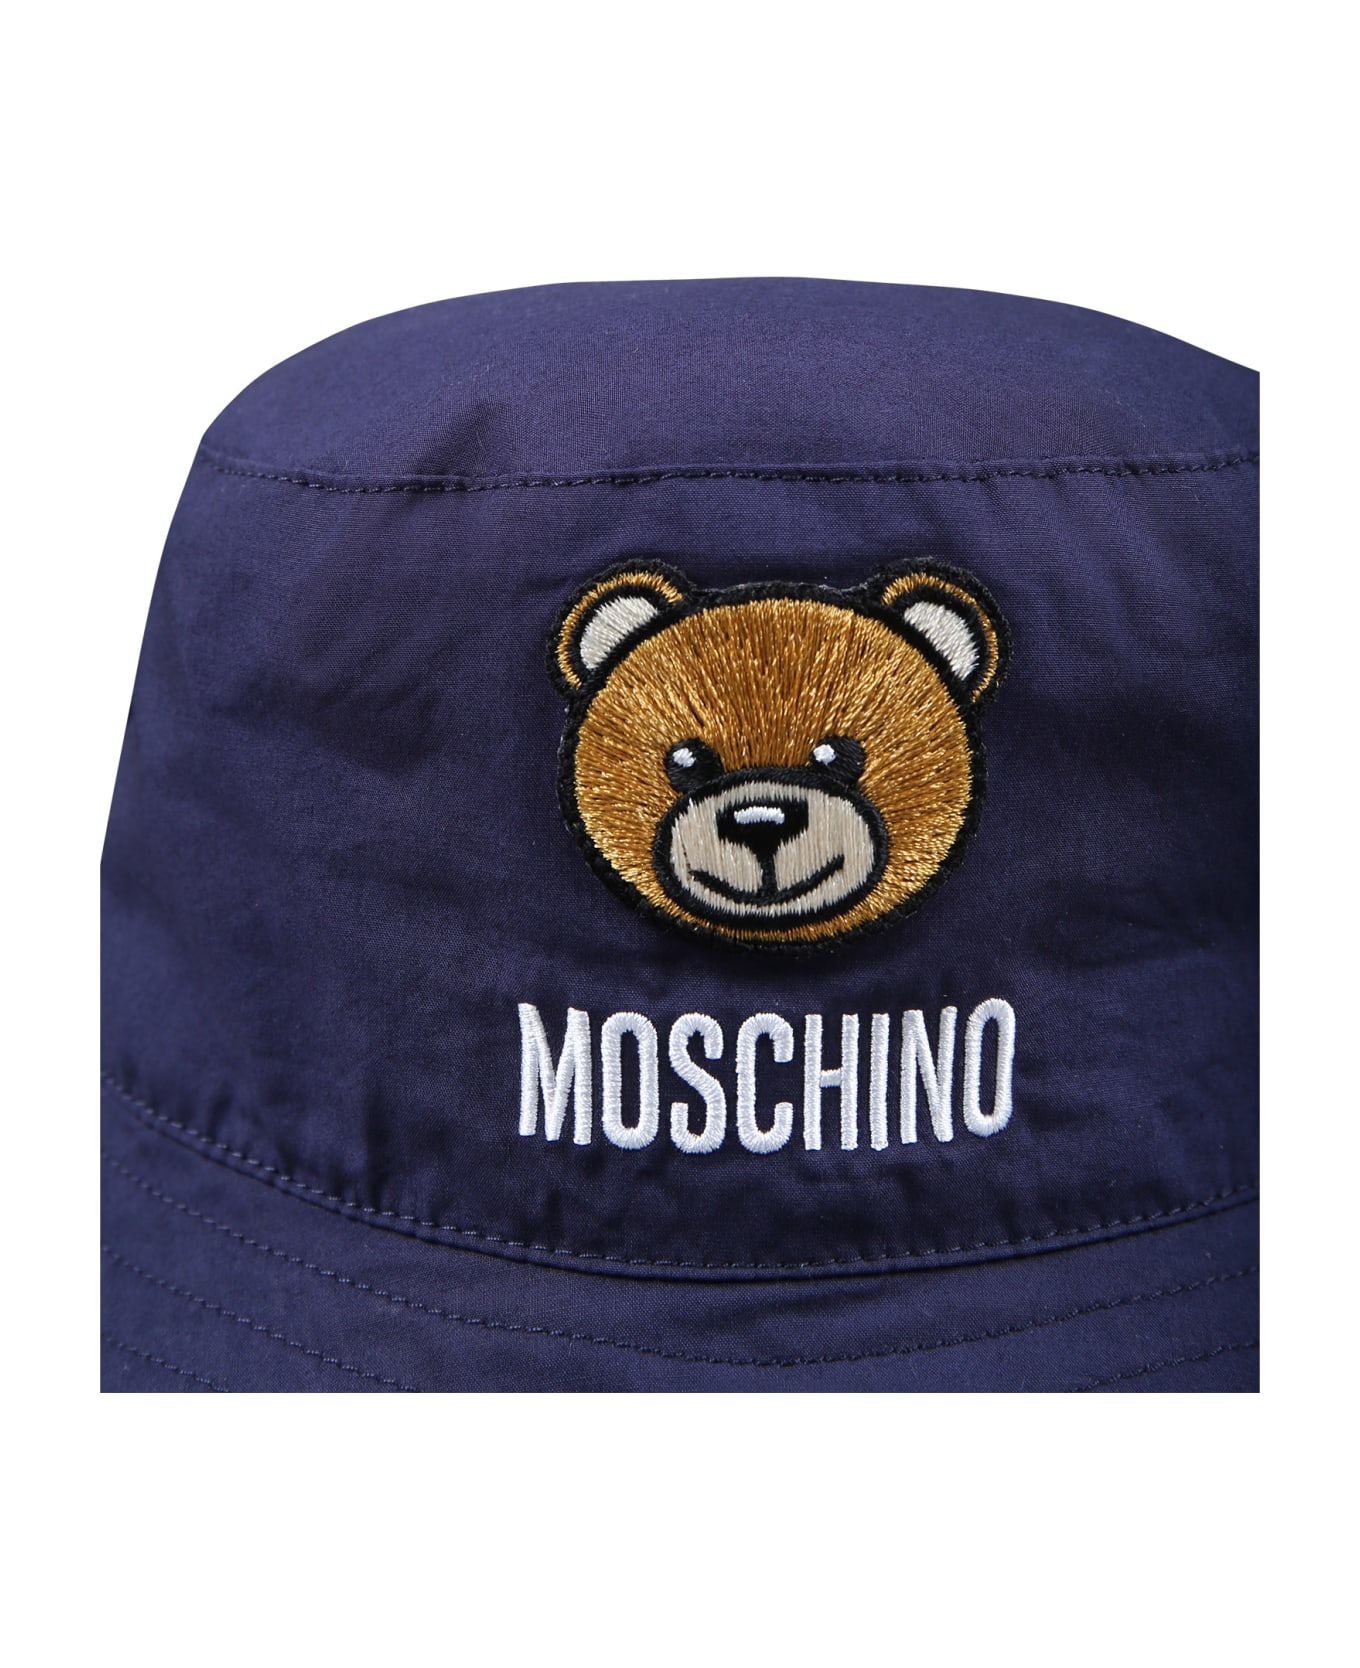 Moschino Blue Cloche For Baby Kids With Teddy Bear - Blue